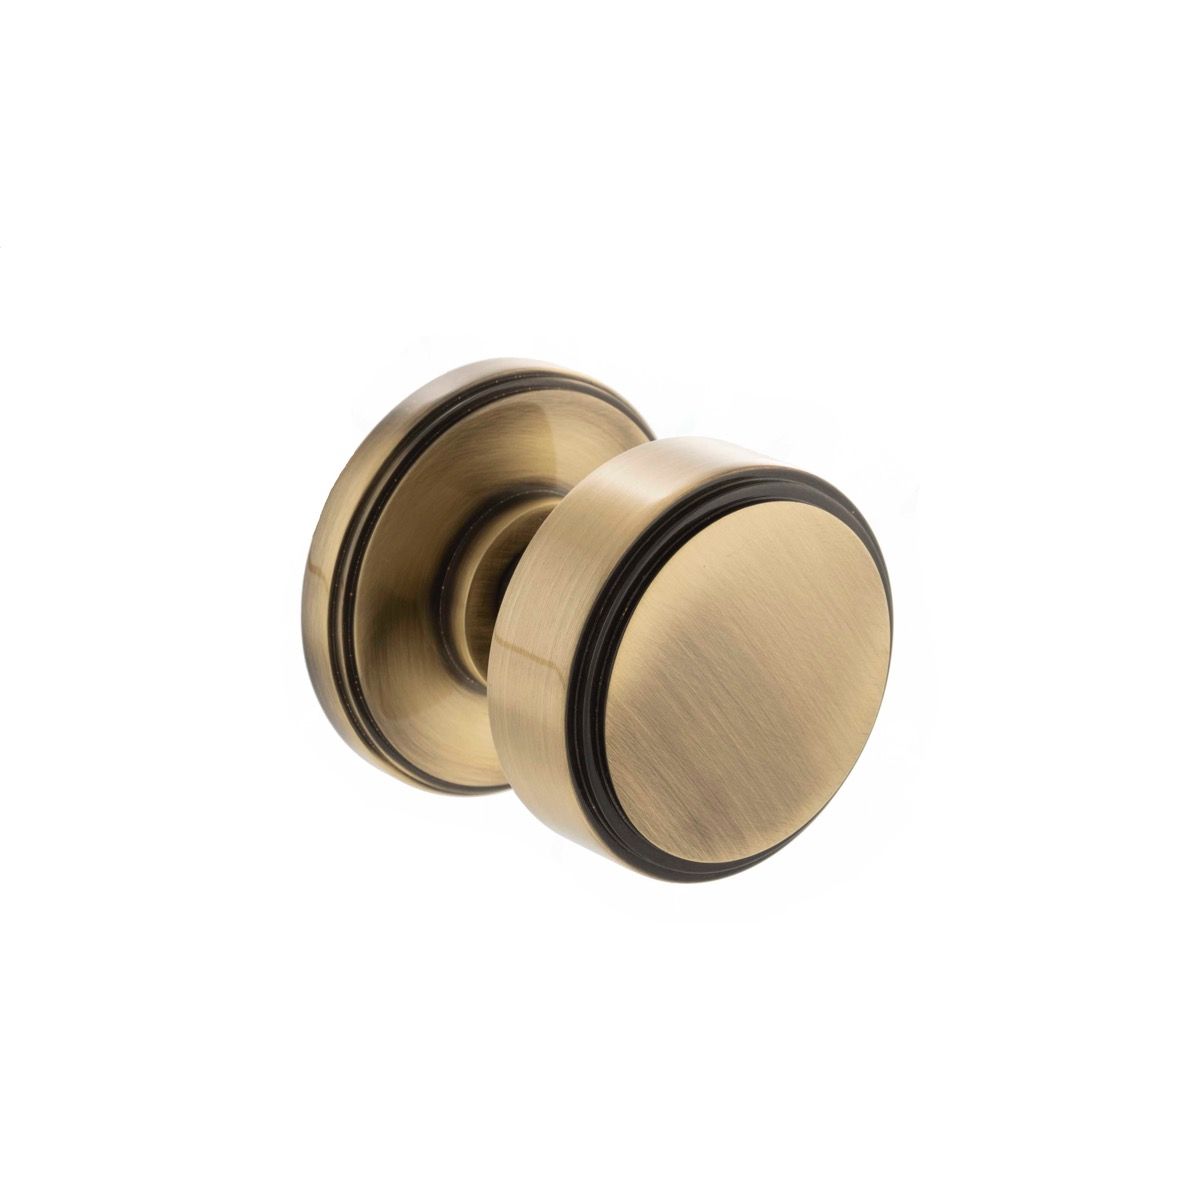 Millhouse Brass Boulton Solid Brass Stepped Mortice Knob on Concealed Fix Rose - Antique Brass MH350SMKAB